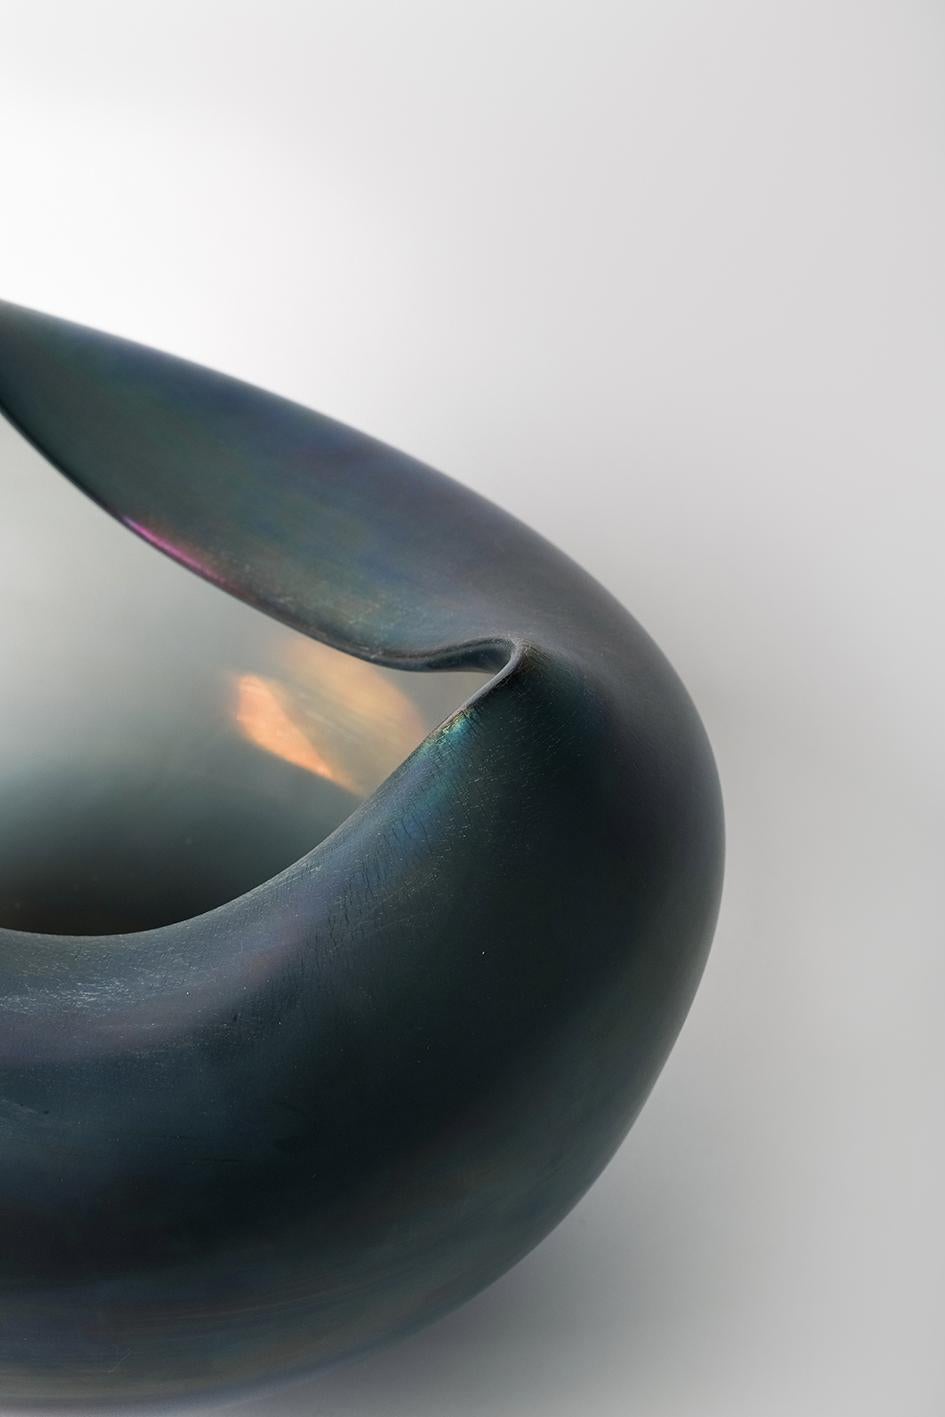 Ghebo is a bowl from the Laguna Collection designed by Ludovica+Roberto Palomba for Purho in spring 2022.
Large volumes and wavy profiles characterize this vessel which name — Ghebo — refers to the minor canals that cross the emerging shoals